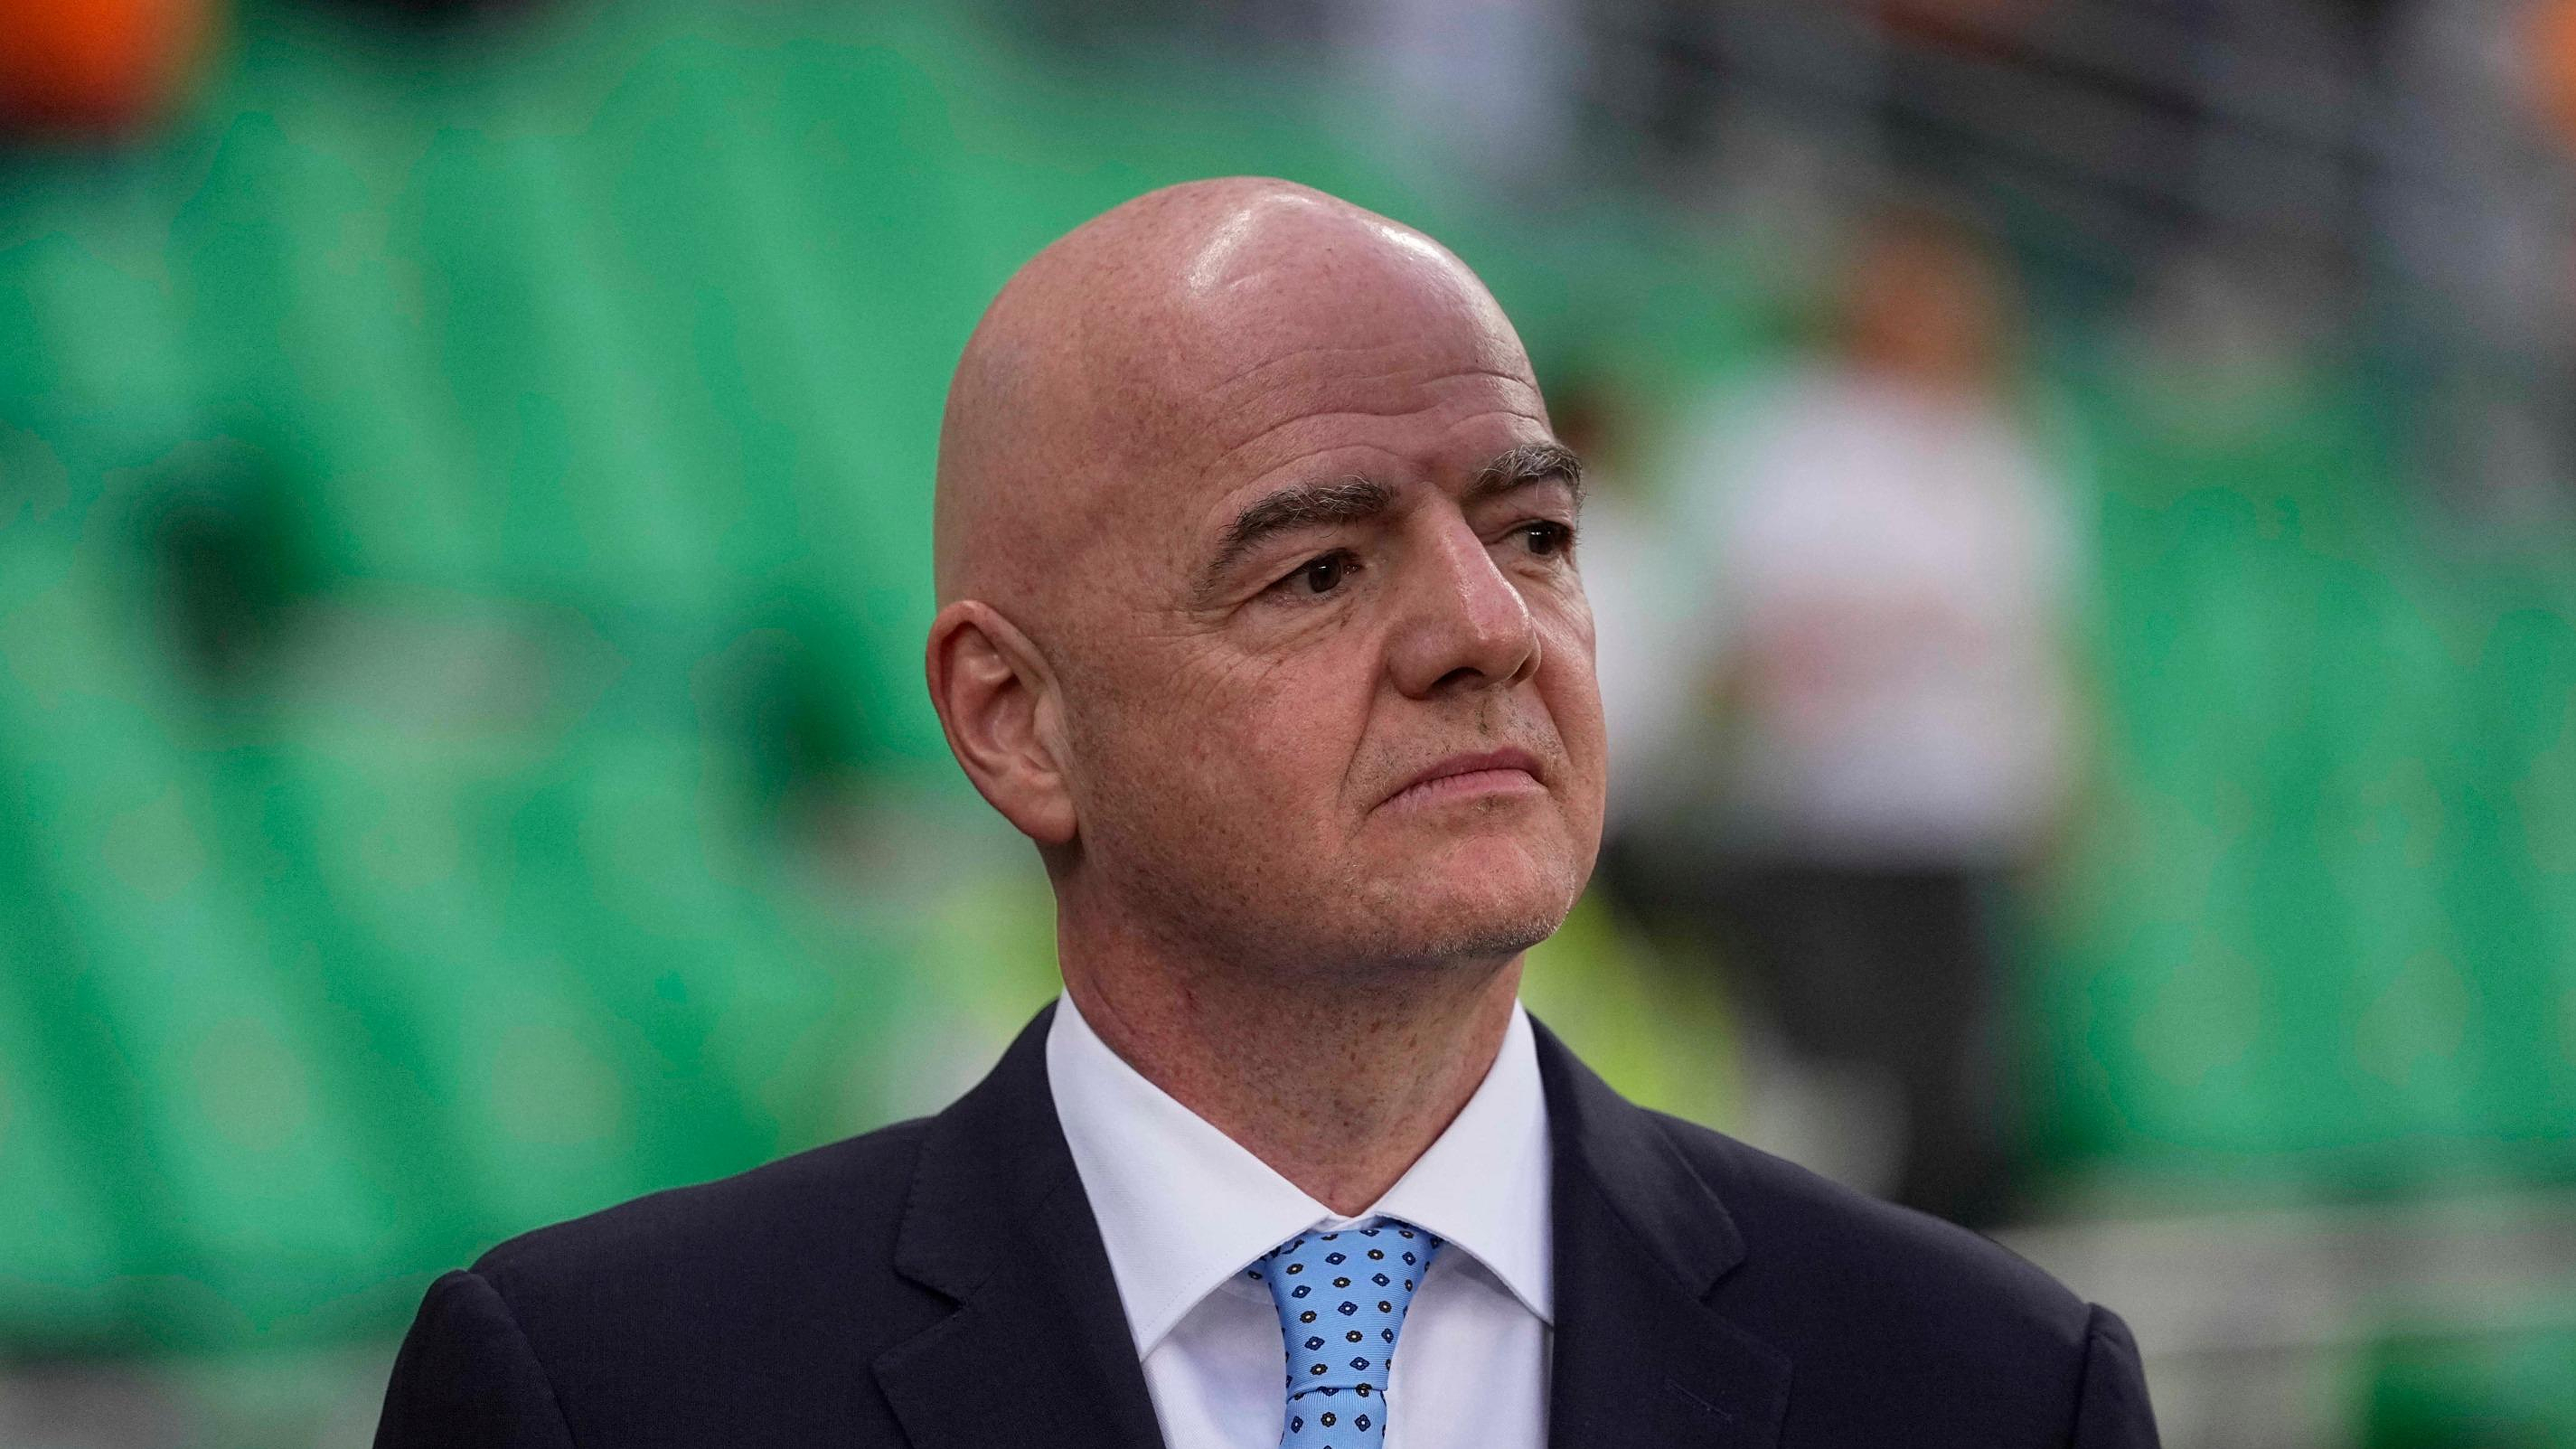 Foot: “The safety of referees and their assistants must be guaranteed at all times”, denounces Gianni Infantino